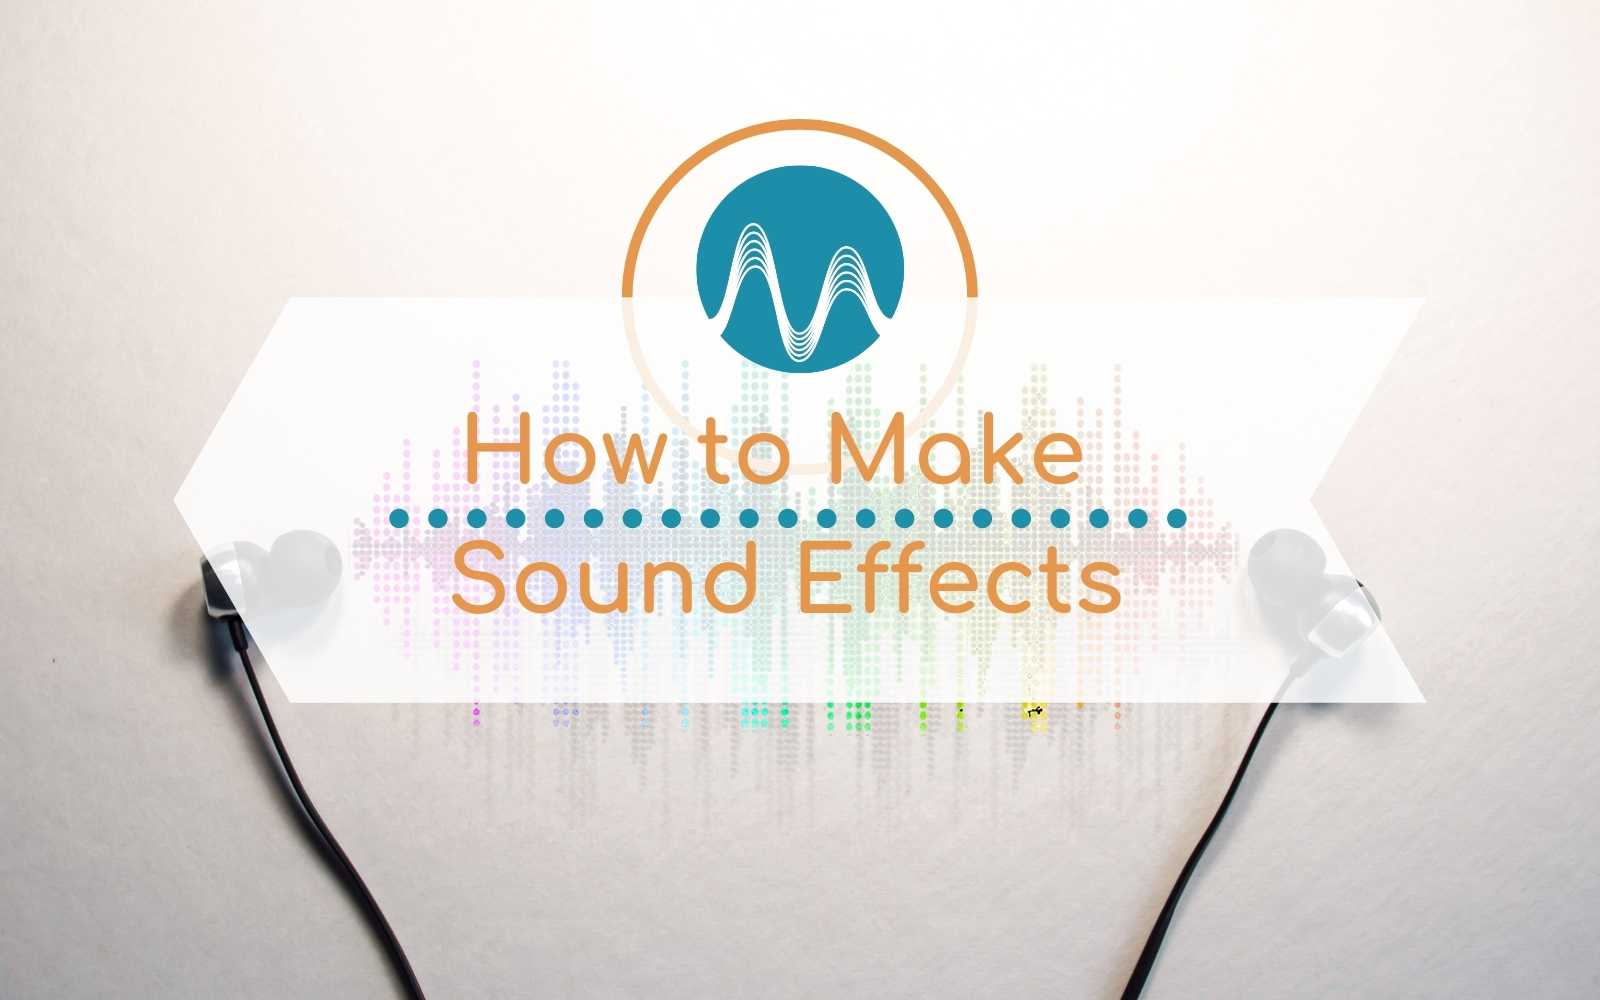 How to Make Sound Effects Audio Editing sound effects Music Radio Creative